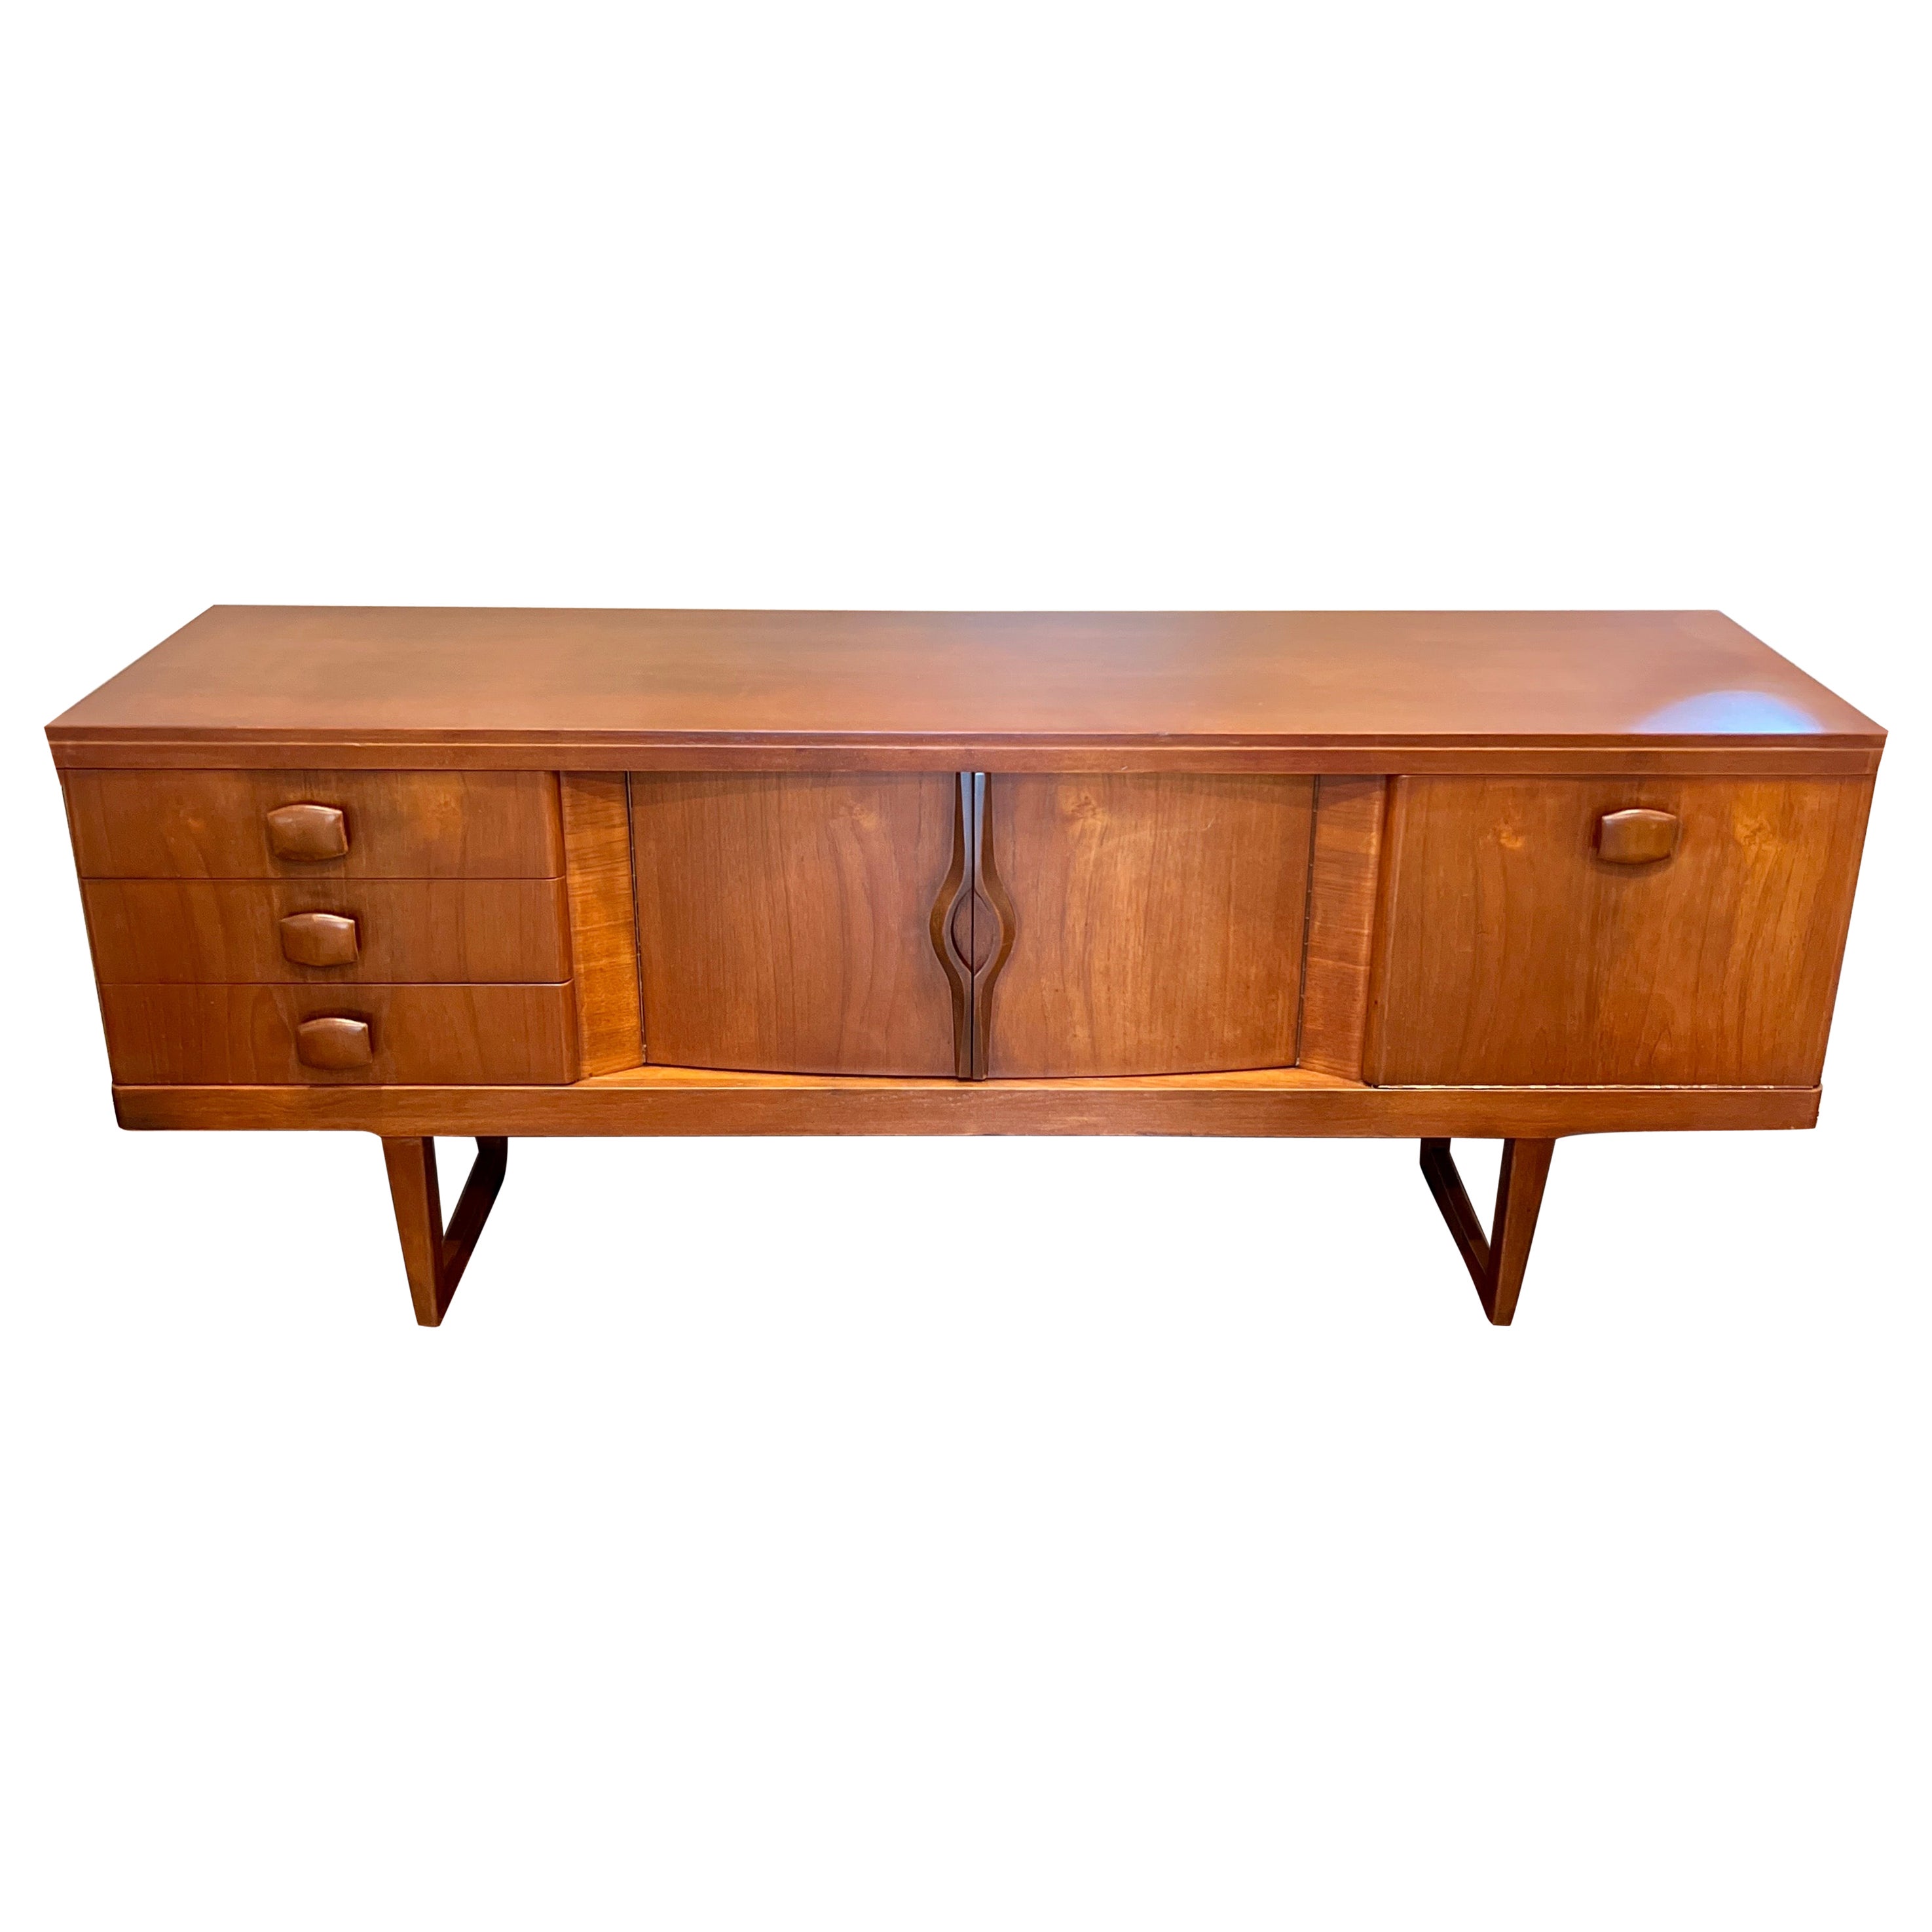 A mid century modern sideboard in teak by Stonehill, circa 1960s